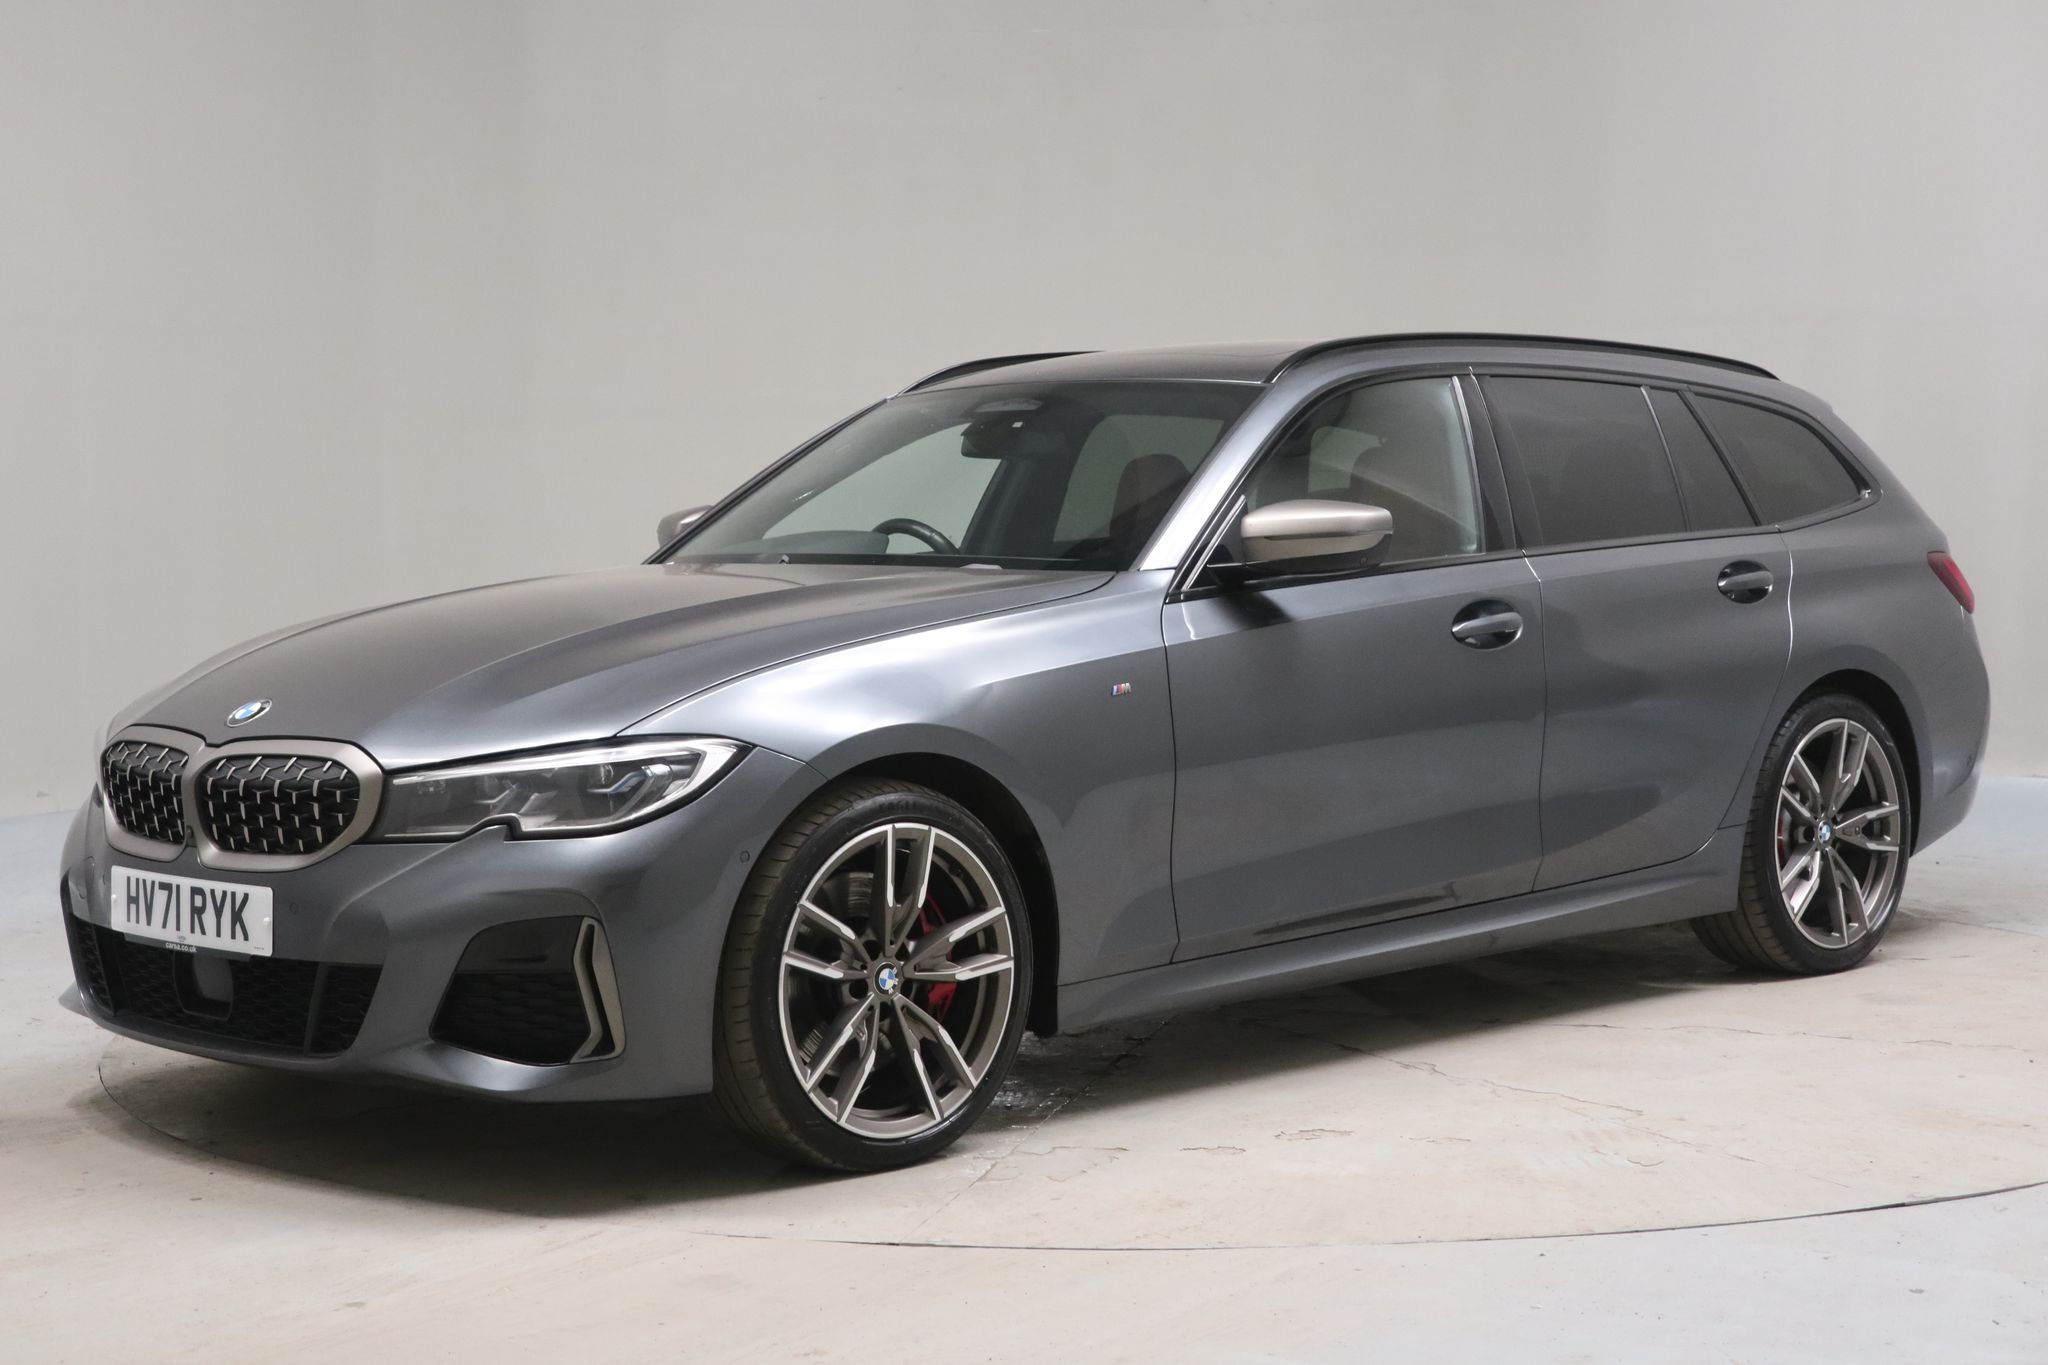 2021 used BMW 3 Series 3.0 M340d MHT Touring xDrive (340 ps)